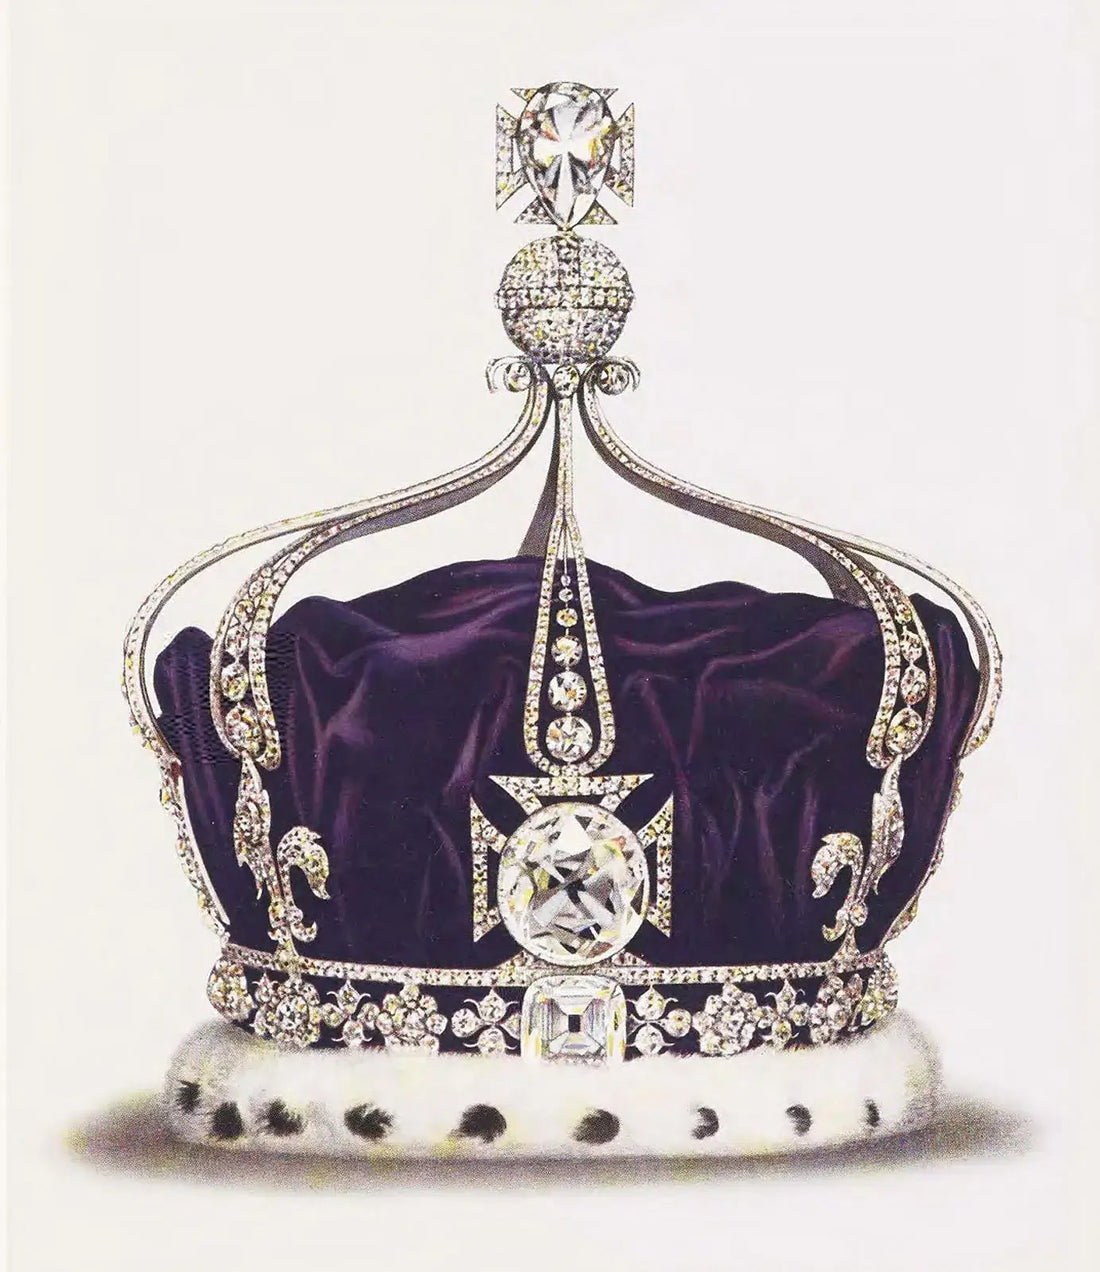 Gems and Jewels: The Dazzling History of Royal Crowns